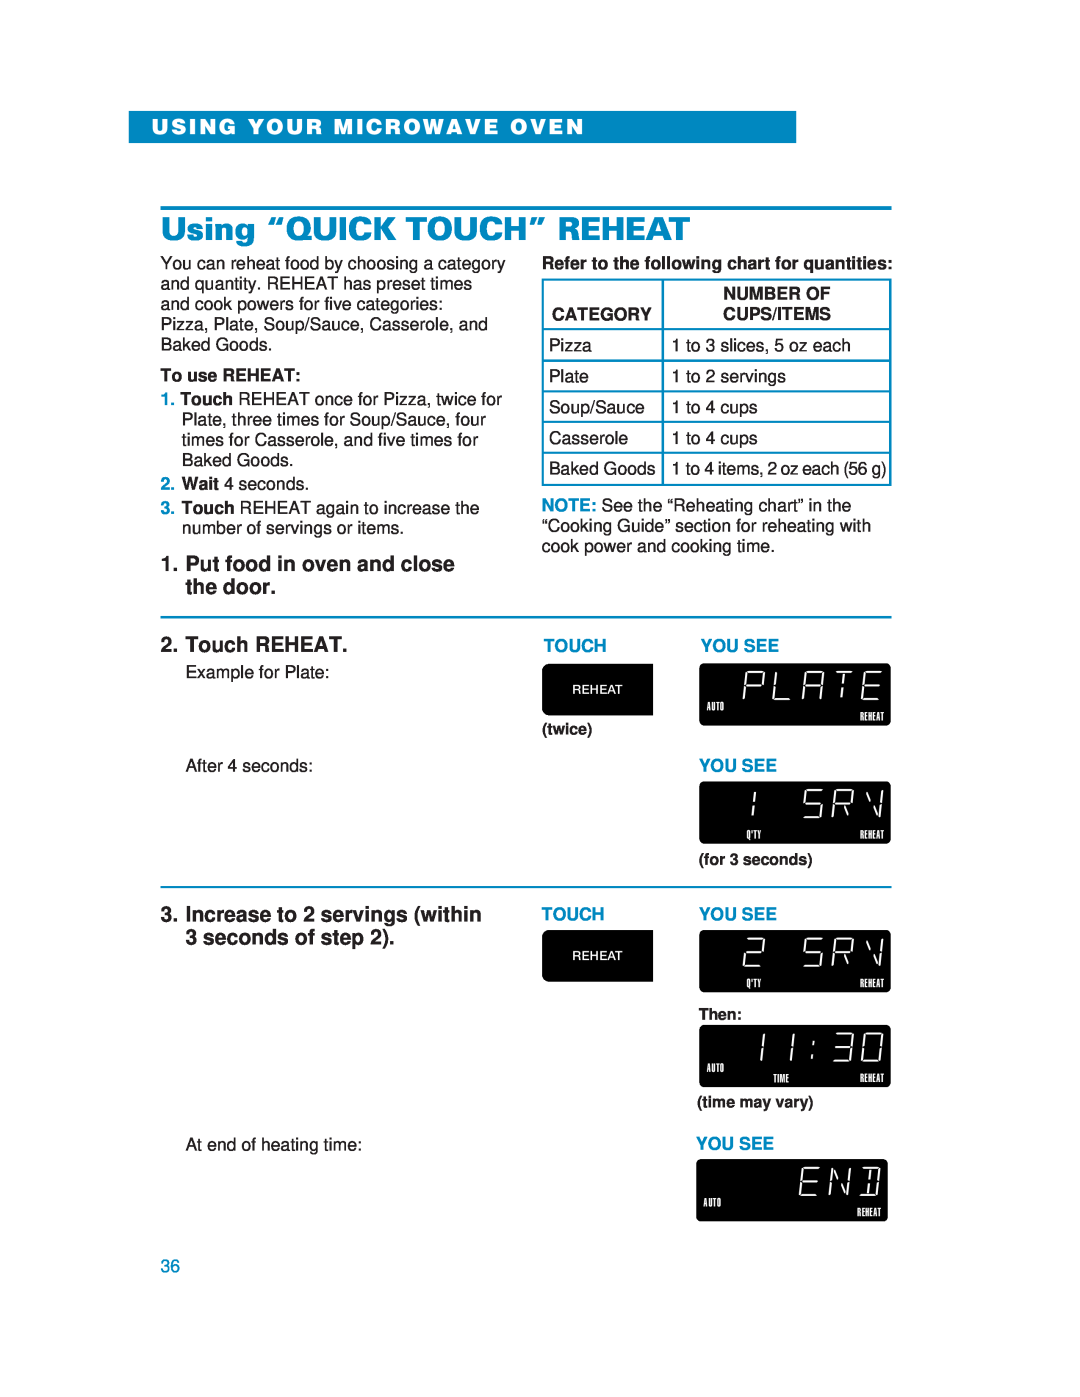 Whirlpool YMH6130XE warranty Using “QUICK TOUCH” REHEAT, Touch REHEAT, Increase to 2 servings within 3 seconds of step 